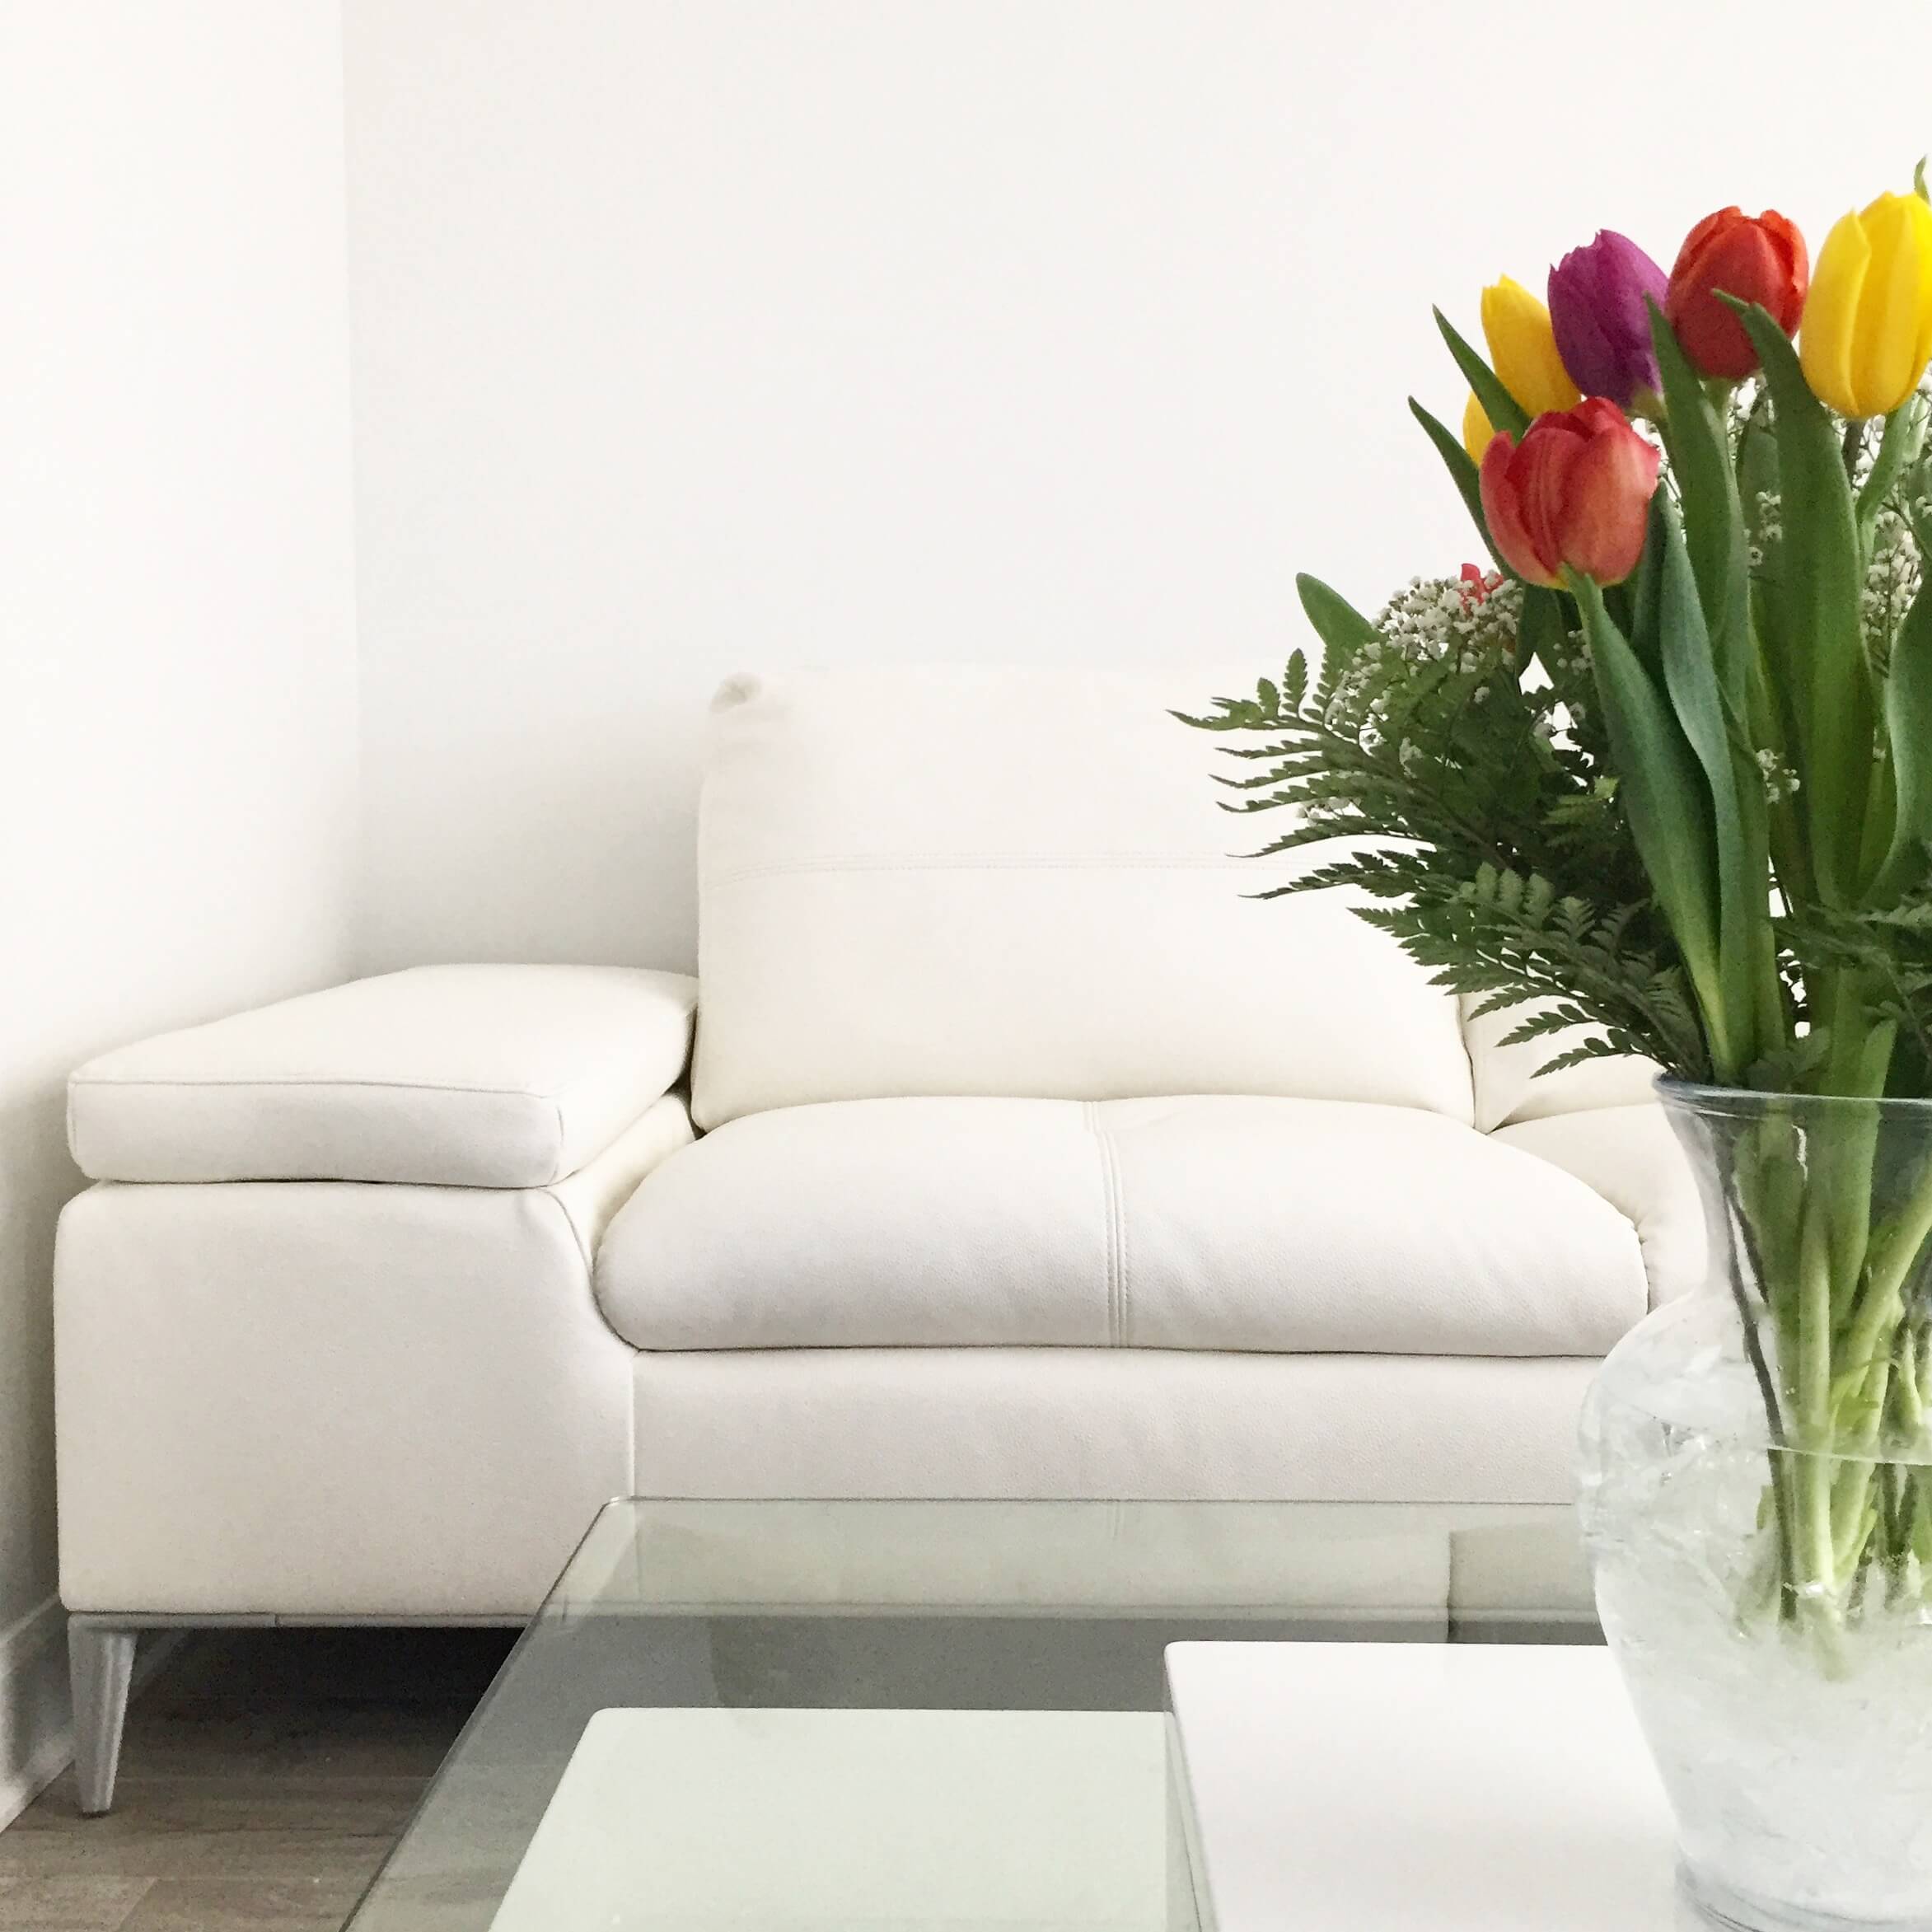 sofa and flowers